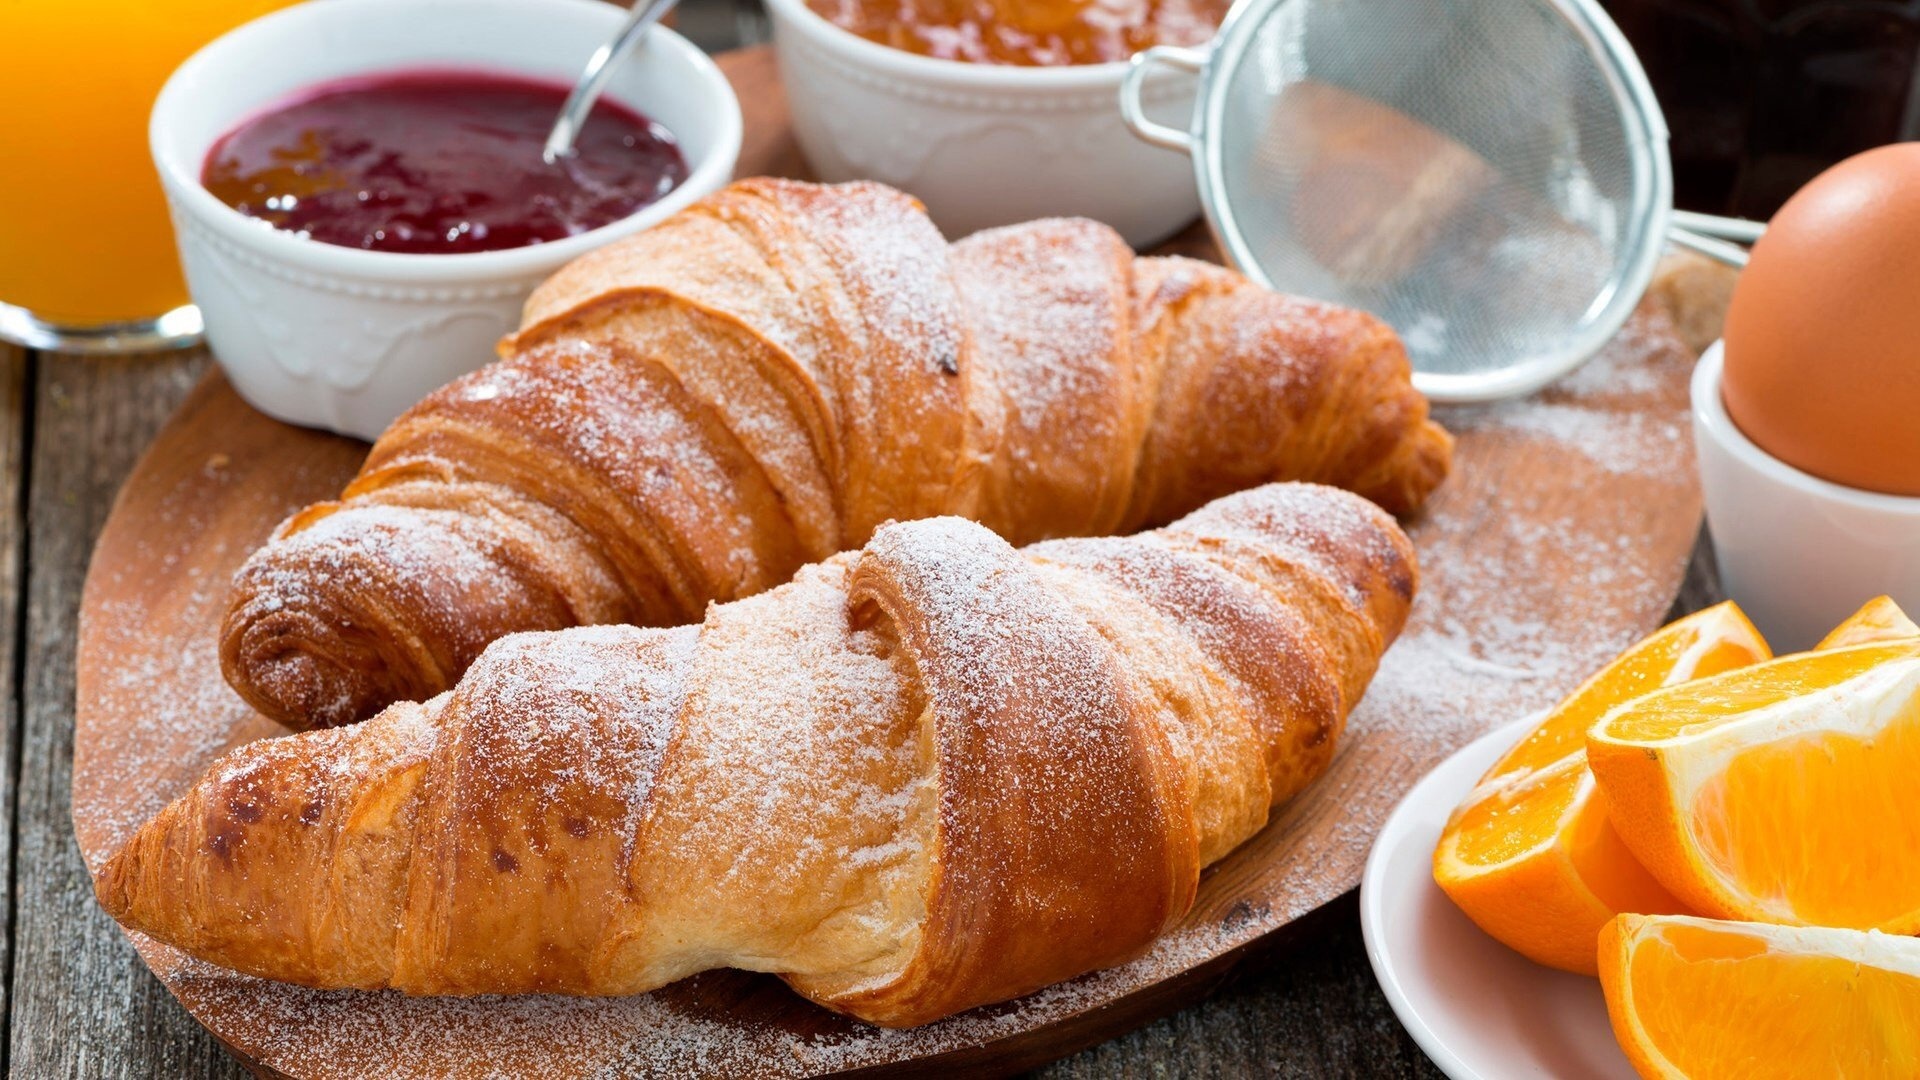 Croissant: Enjoyed plain or with powdered sugar, almond flakes, or sesame seeds. 1920x1080 Full HD Background.